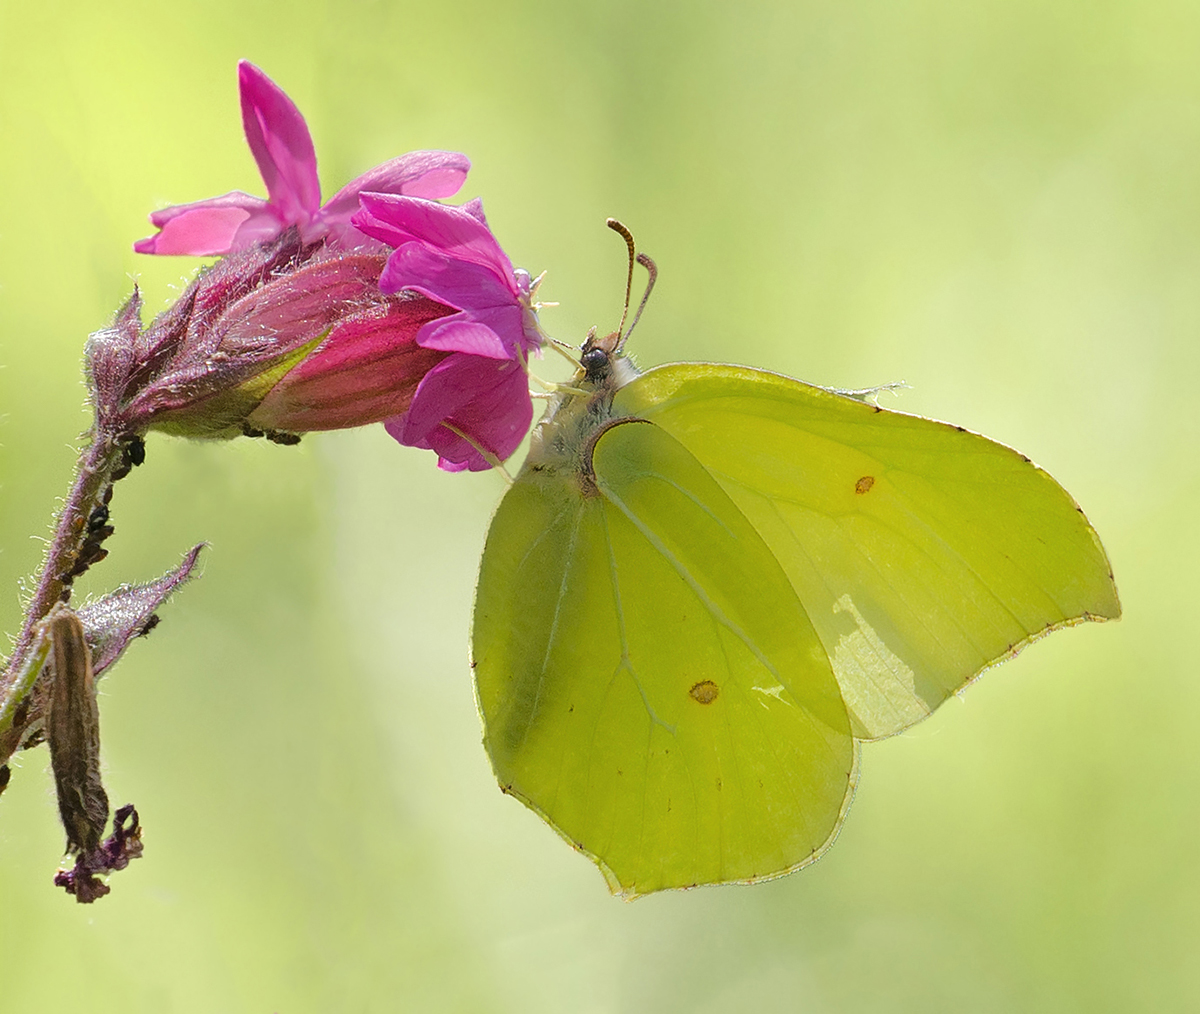 Brimstone and Campion - sounds like a herbal tea but in fact, one of my favourite combinations. Shame the flower wasn't more stunning but then you can't have everything - #sharemondays2024 #fsprintmonday #wexmondays @MiradorDesign @savebutterflies have a nice day everyone